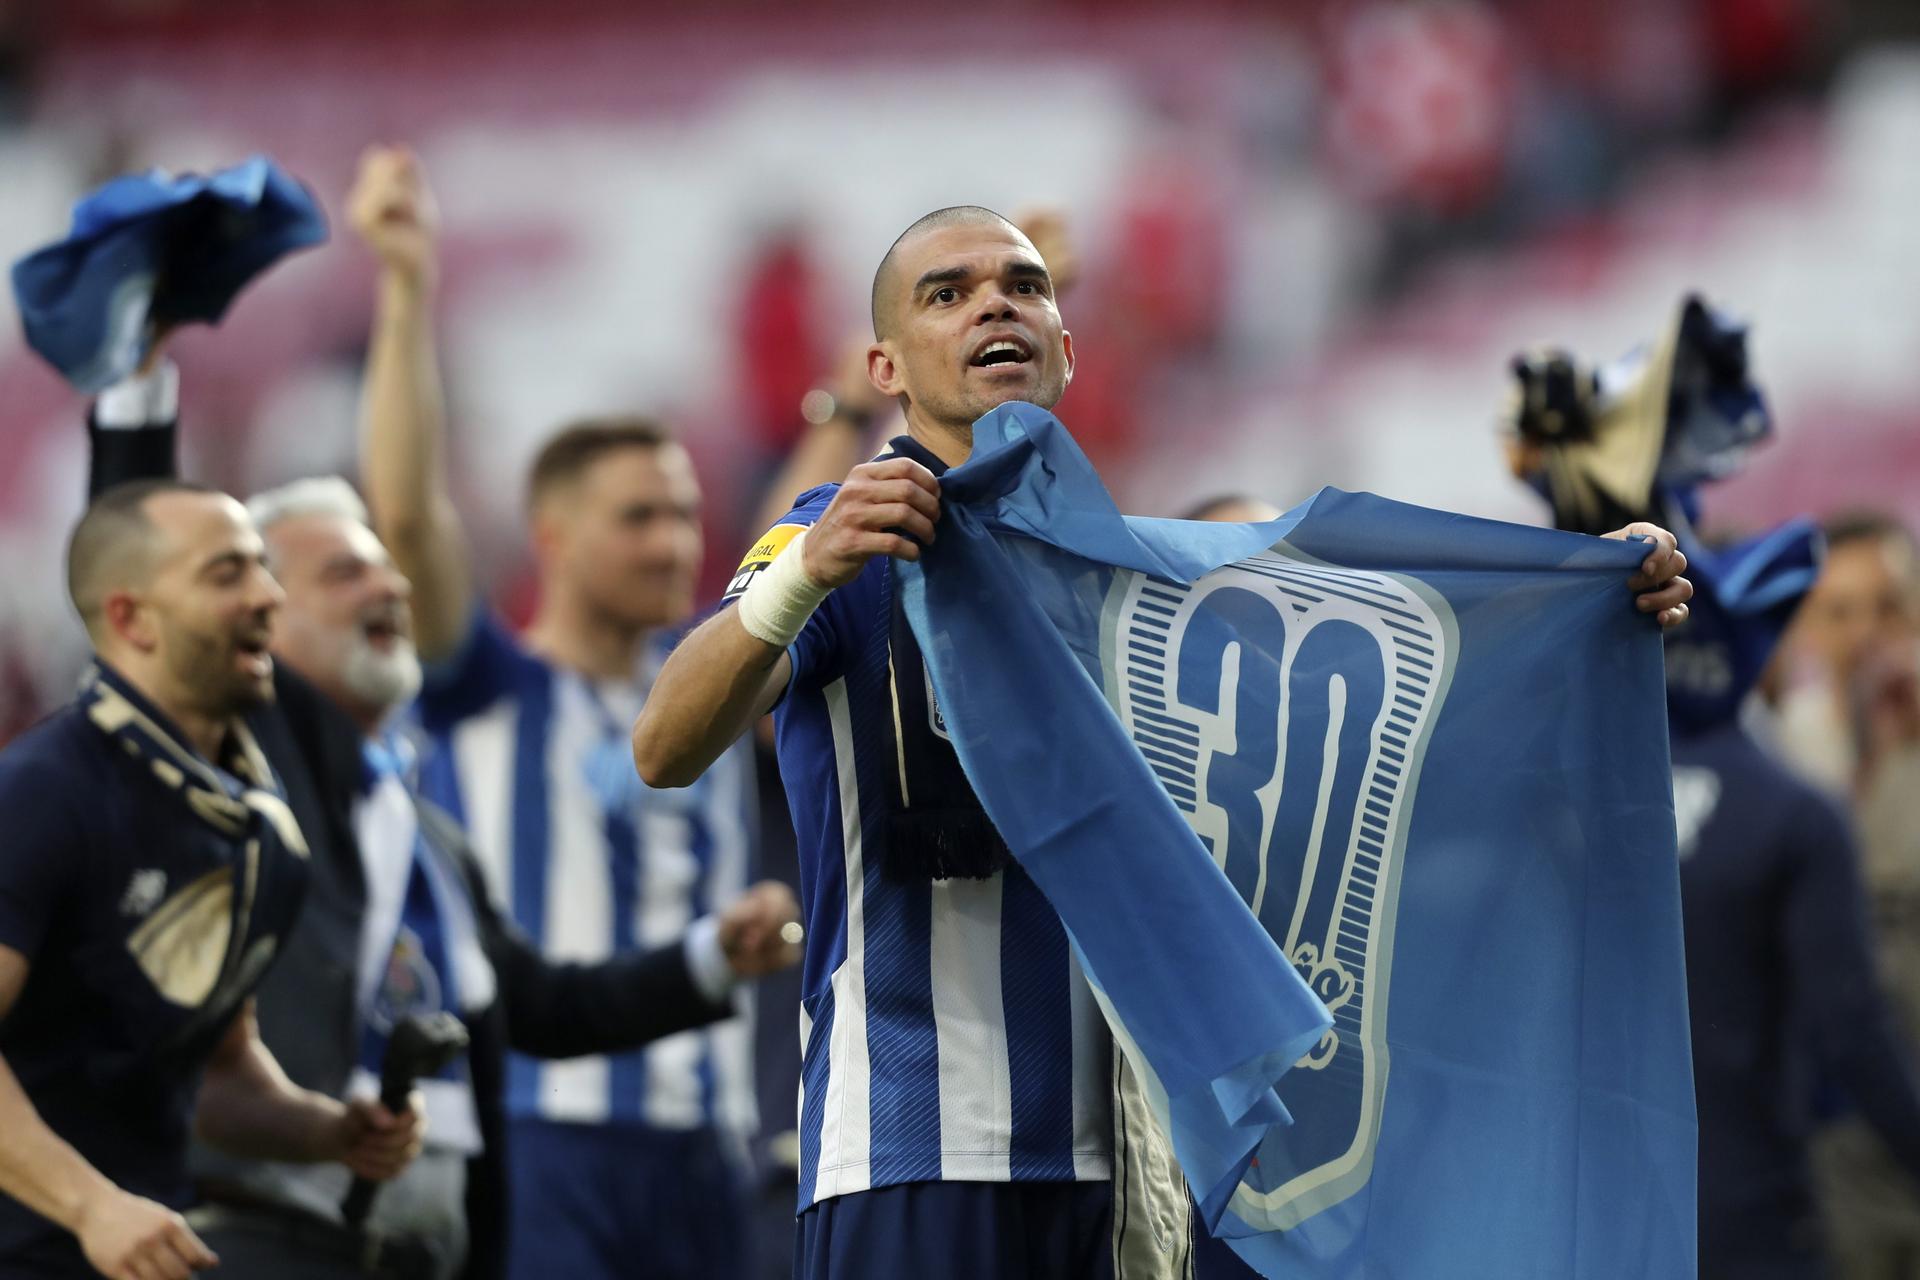 Club Brugge vs. Porto Predictions, Picks and Betting Odds - Tuesday, September 13, 2022